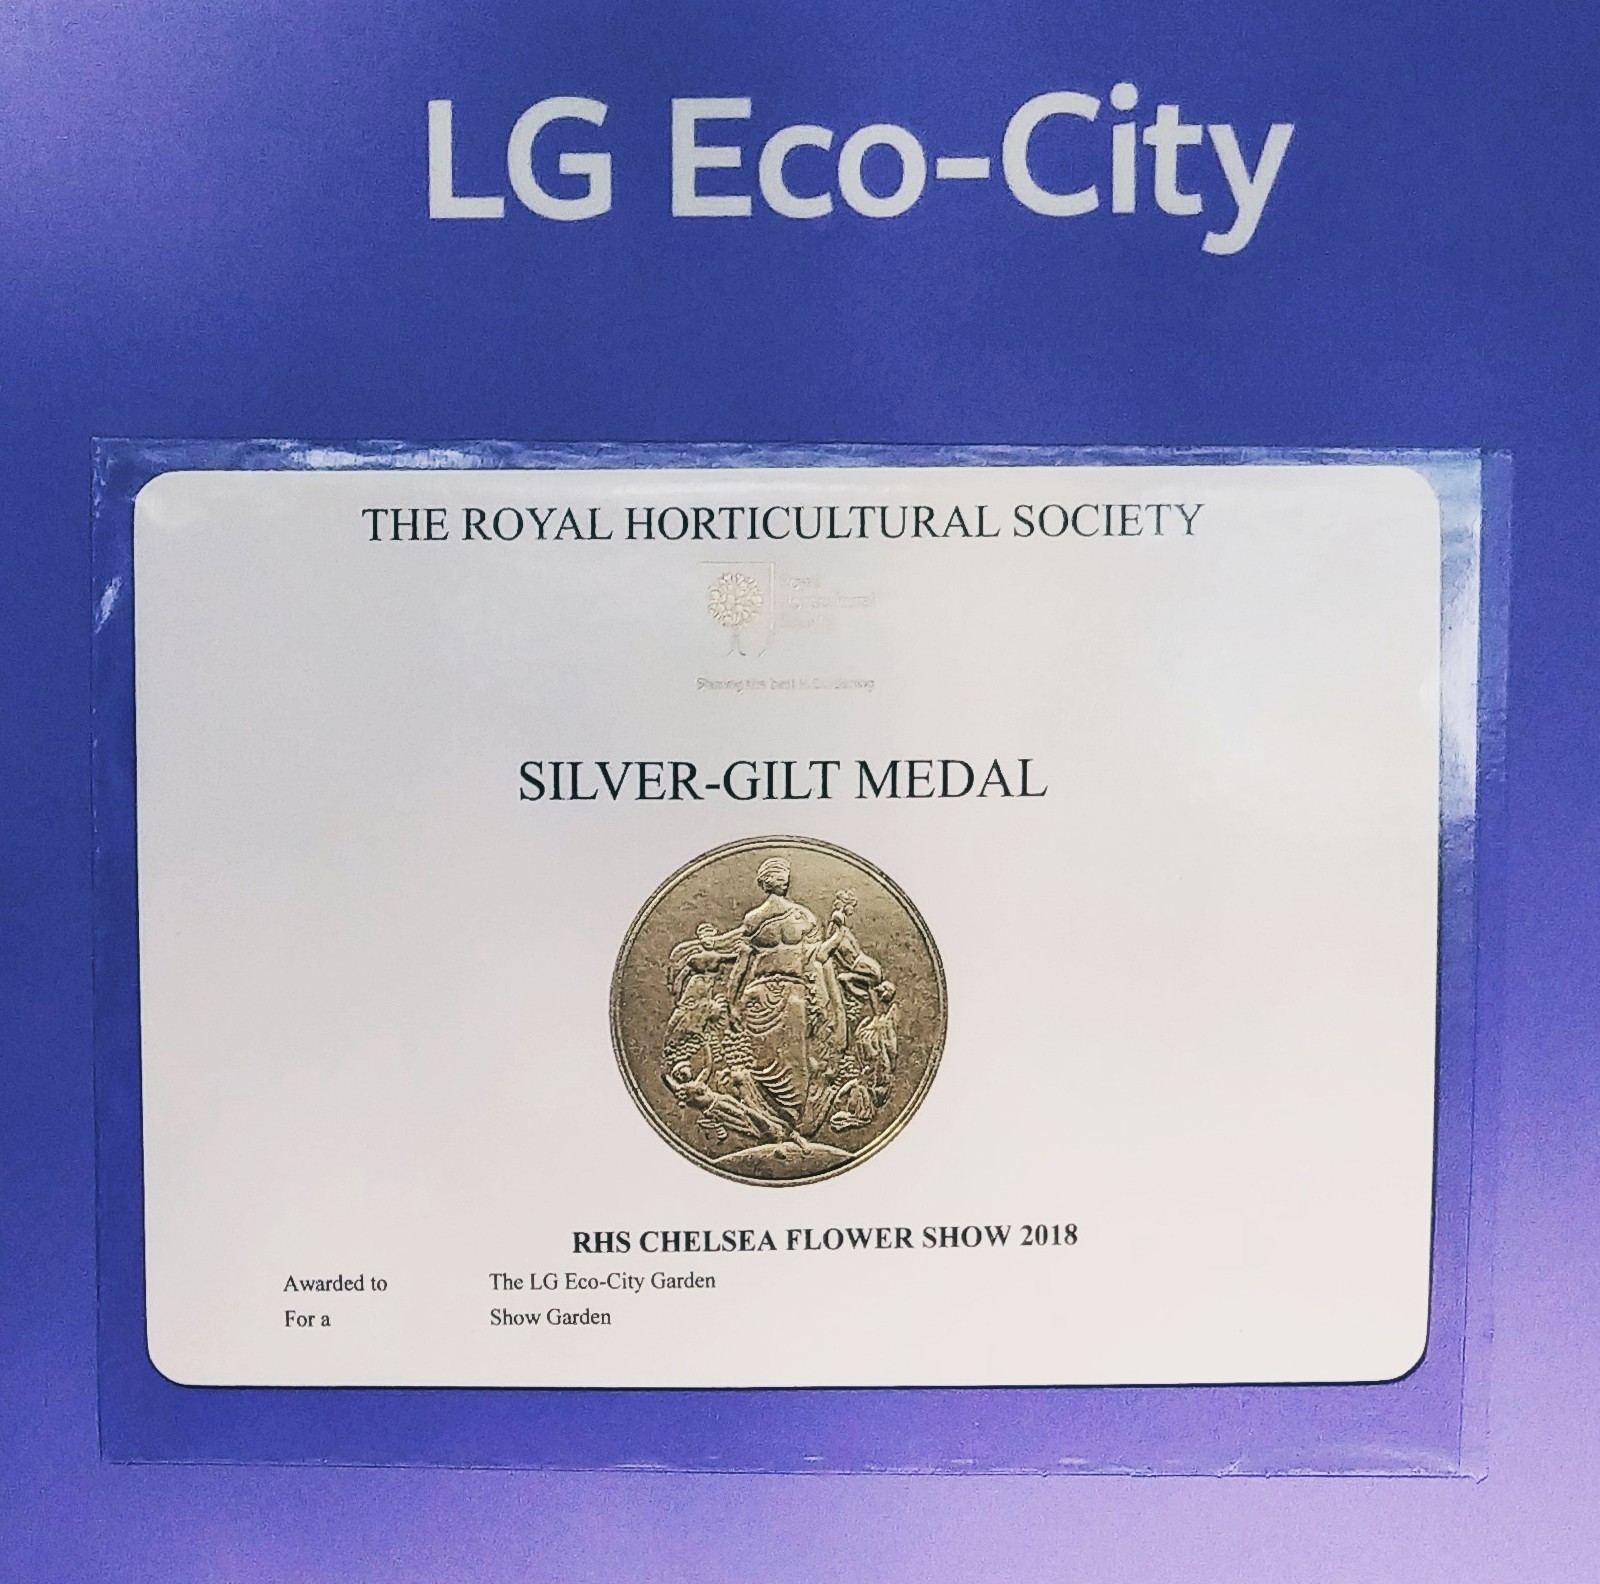 The Silver-gilt Medal awarded to LG Eco-City Garden at RHS Chelsea Flower Show 2018